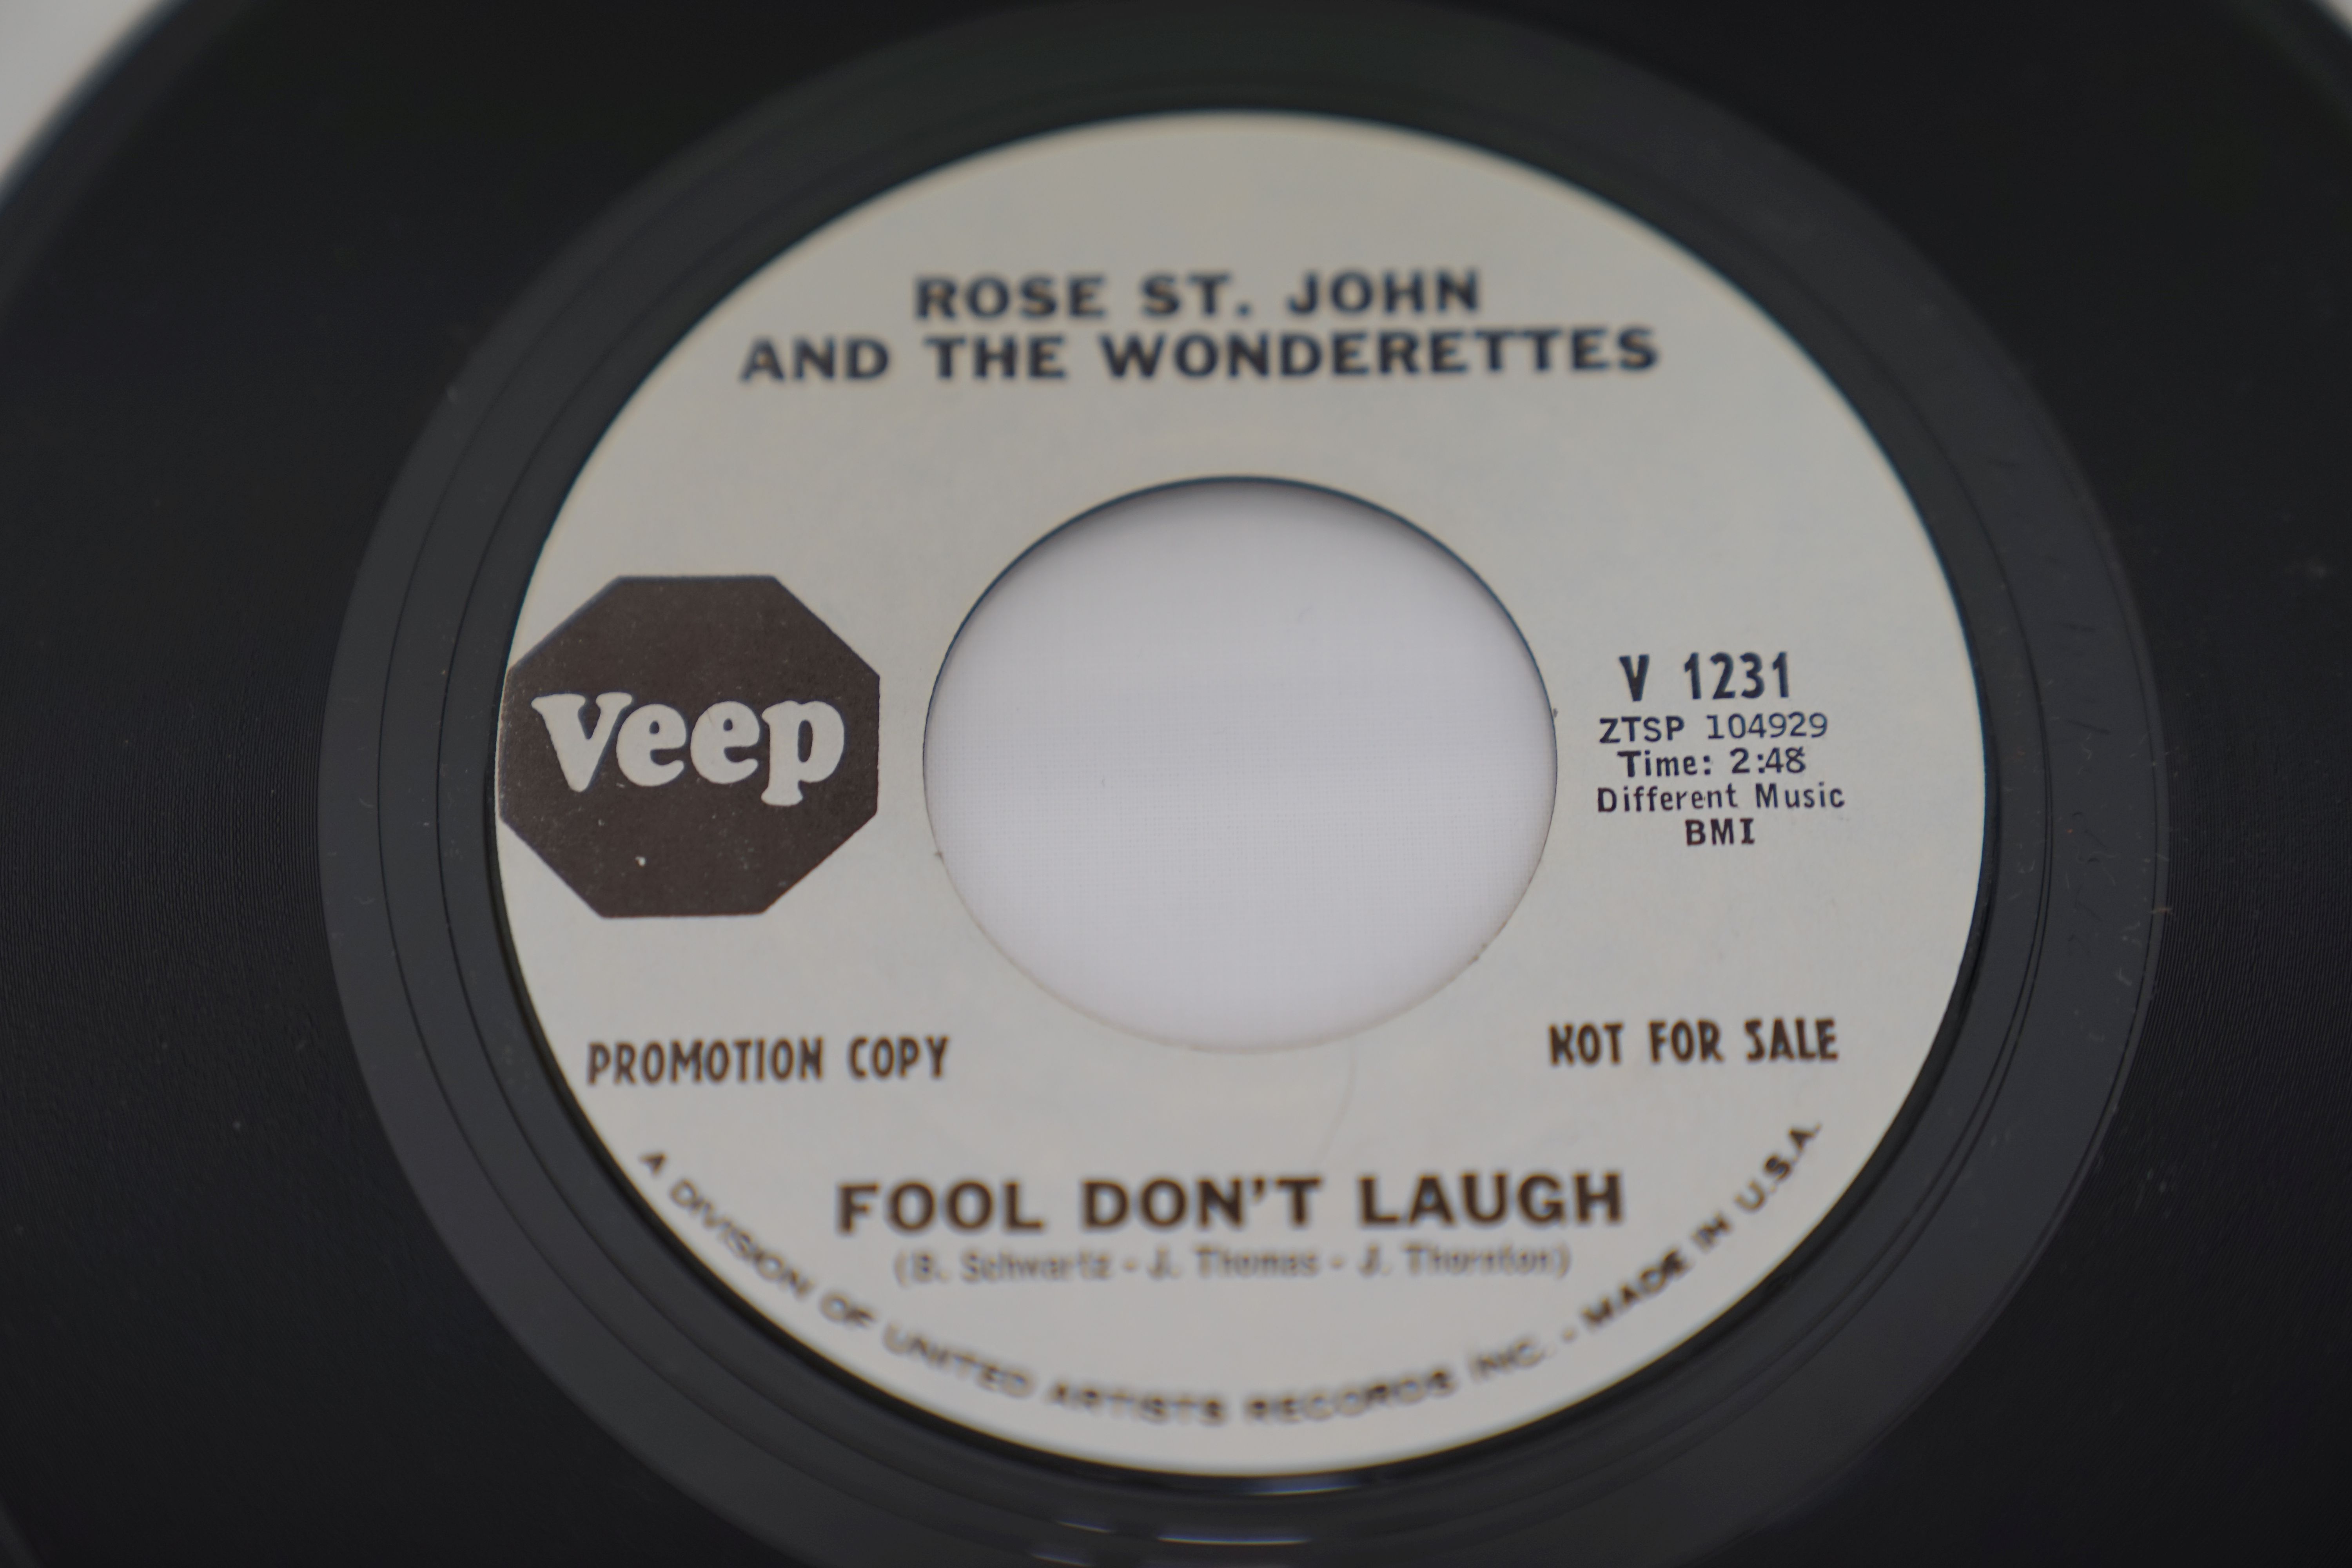 Vinyl - Rose St. John And The Wonderettes - I know The Meaning (Veep Records V1231 Promo) NM - Image 4 of 5